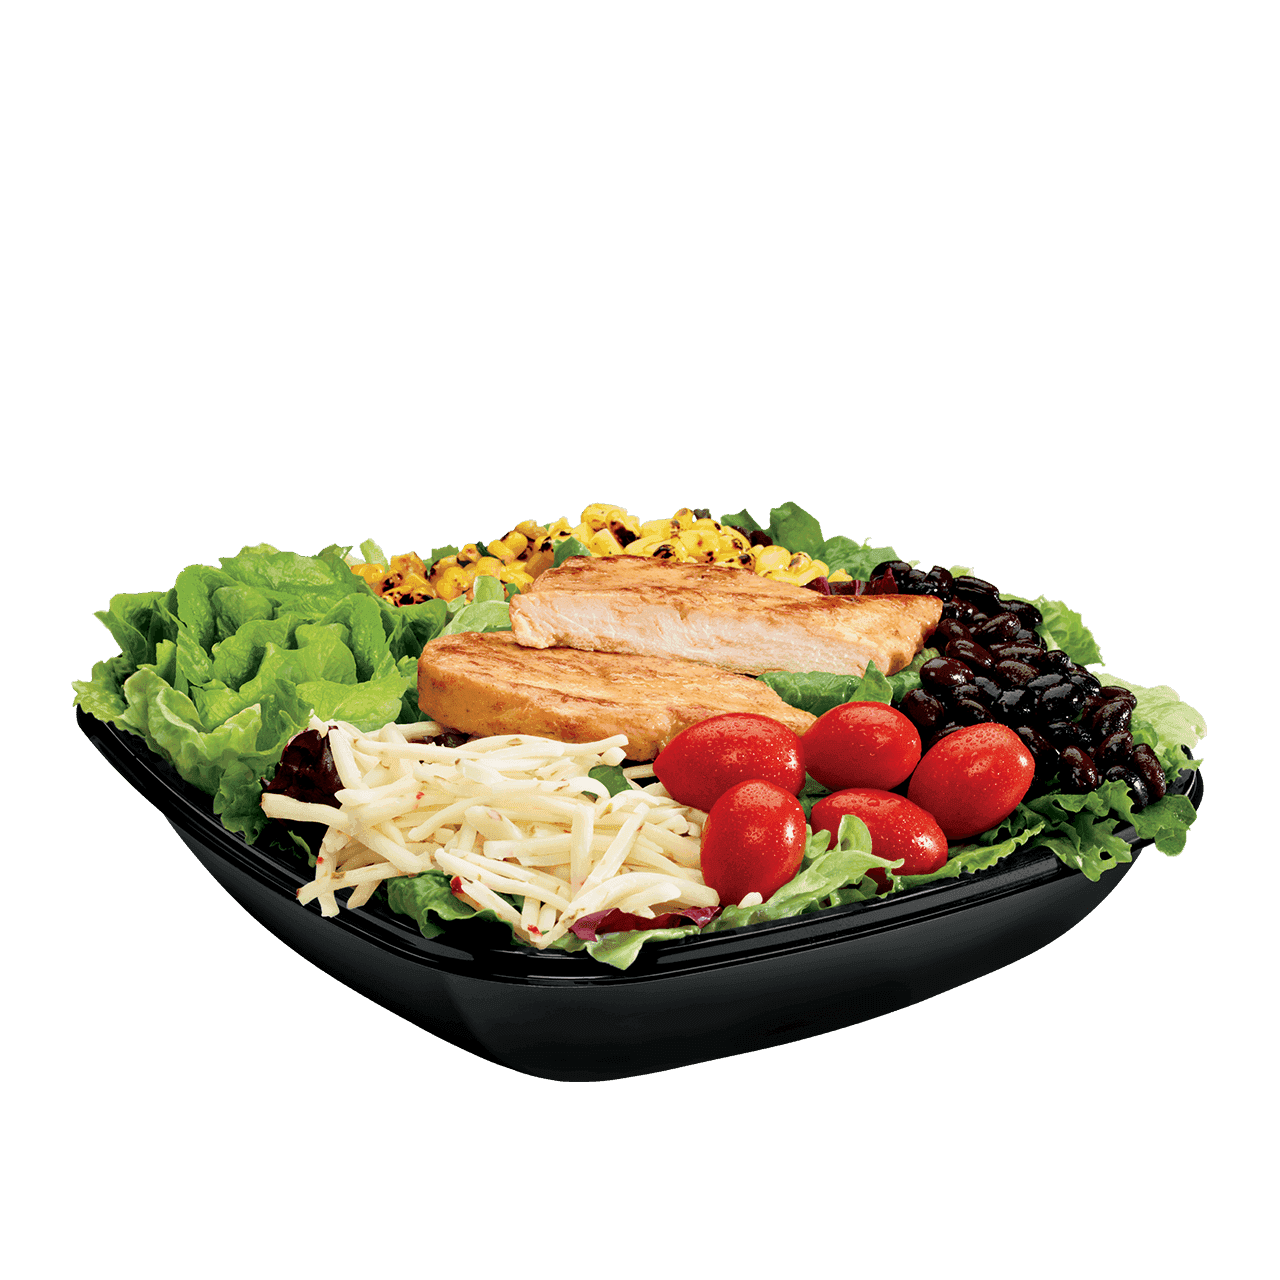 Jack in the box asian salad recipe